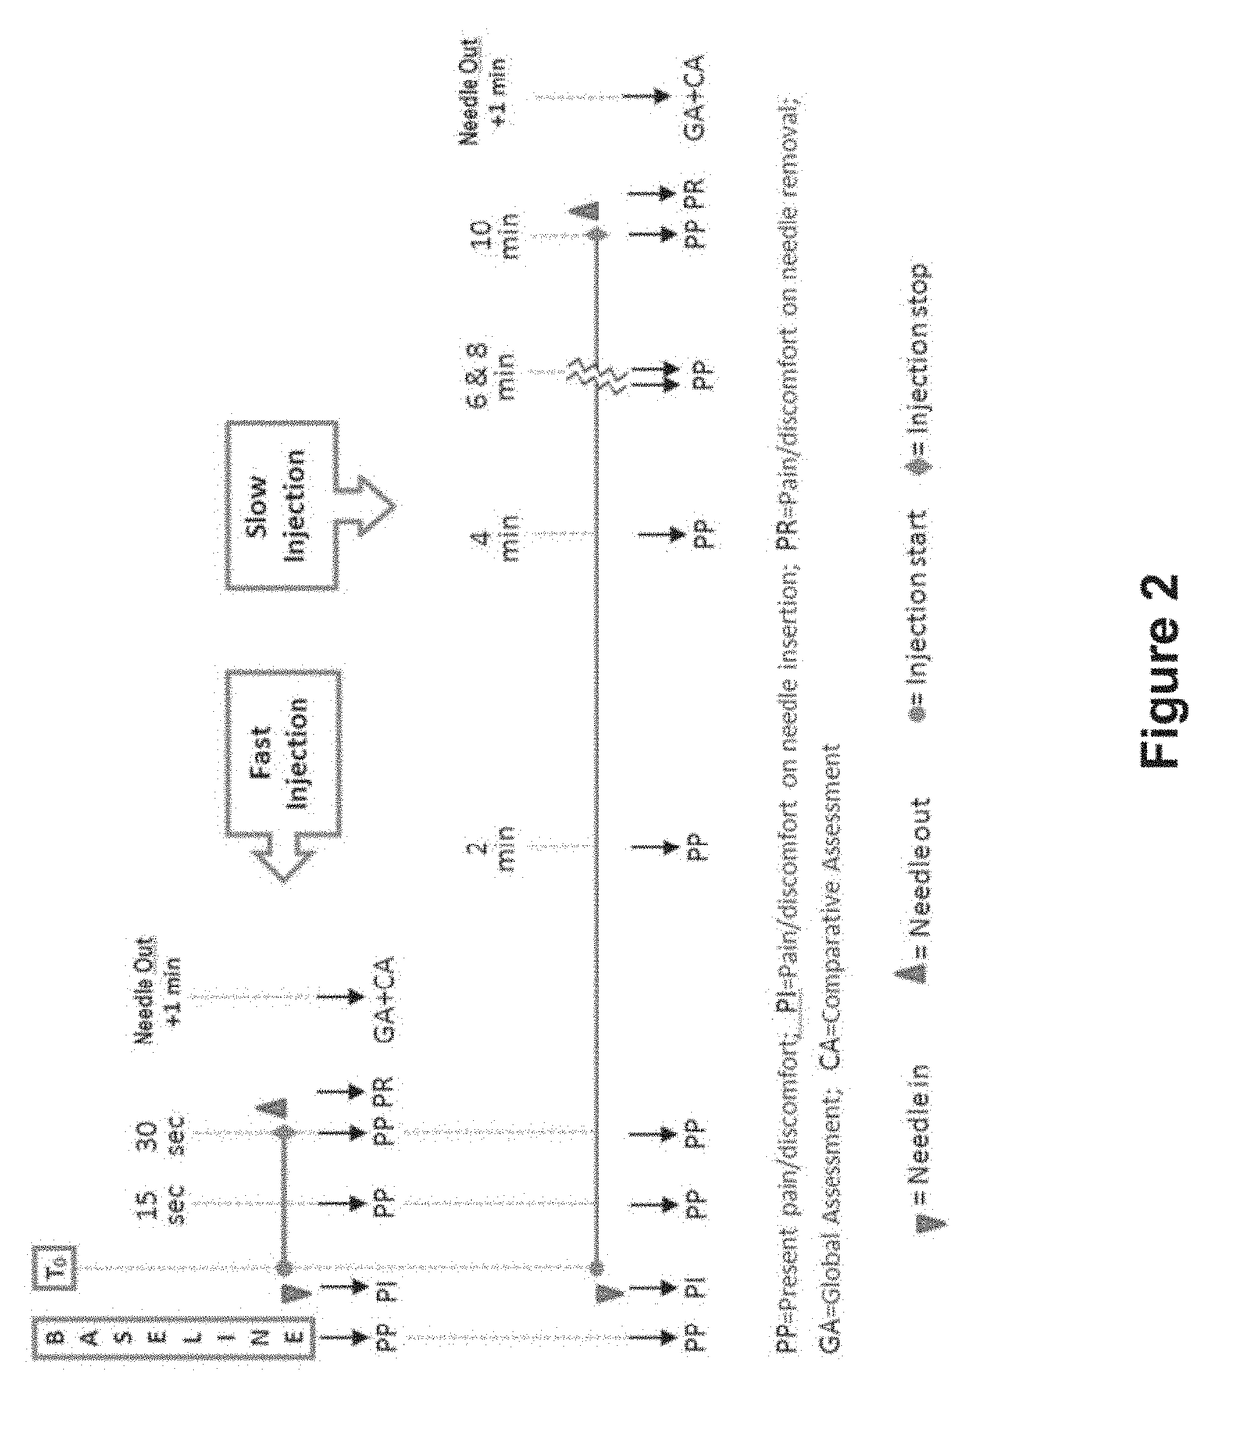 Methods for Treating Atopic Dermatitis by Administering an IL-4R Antagonist